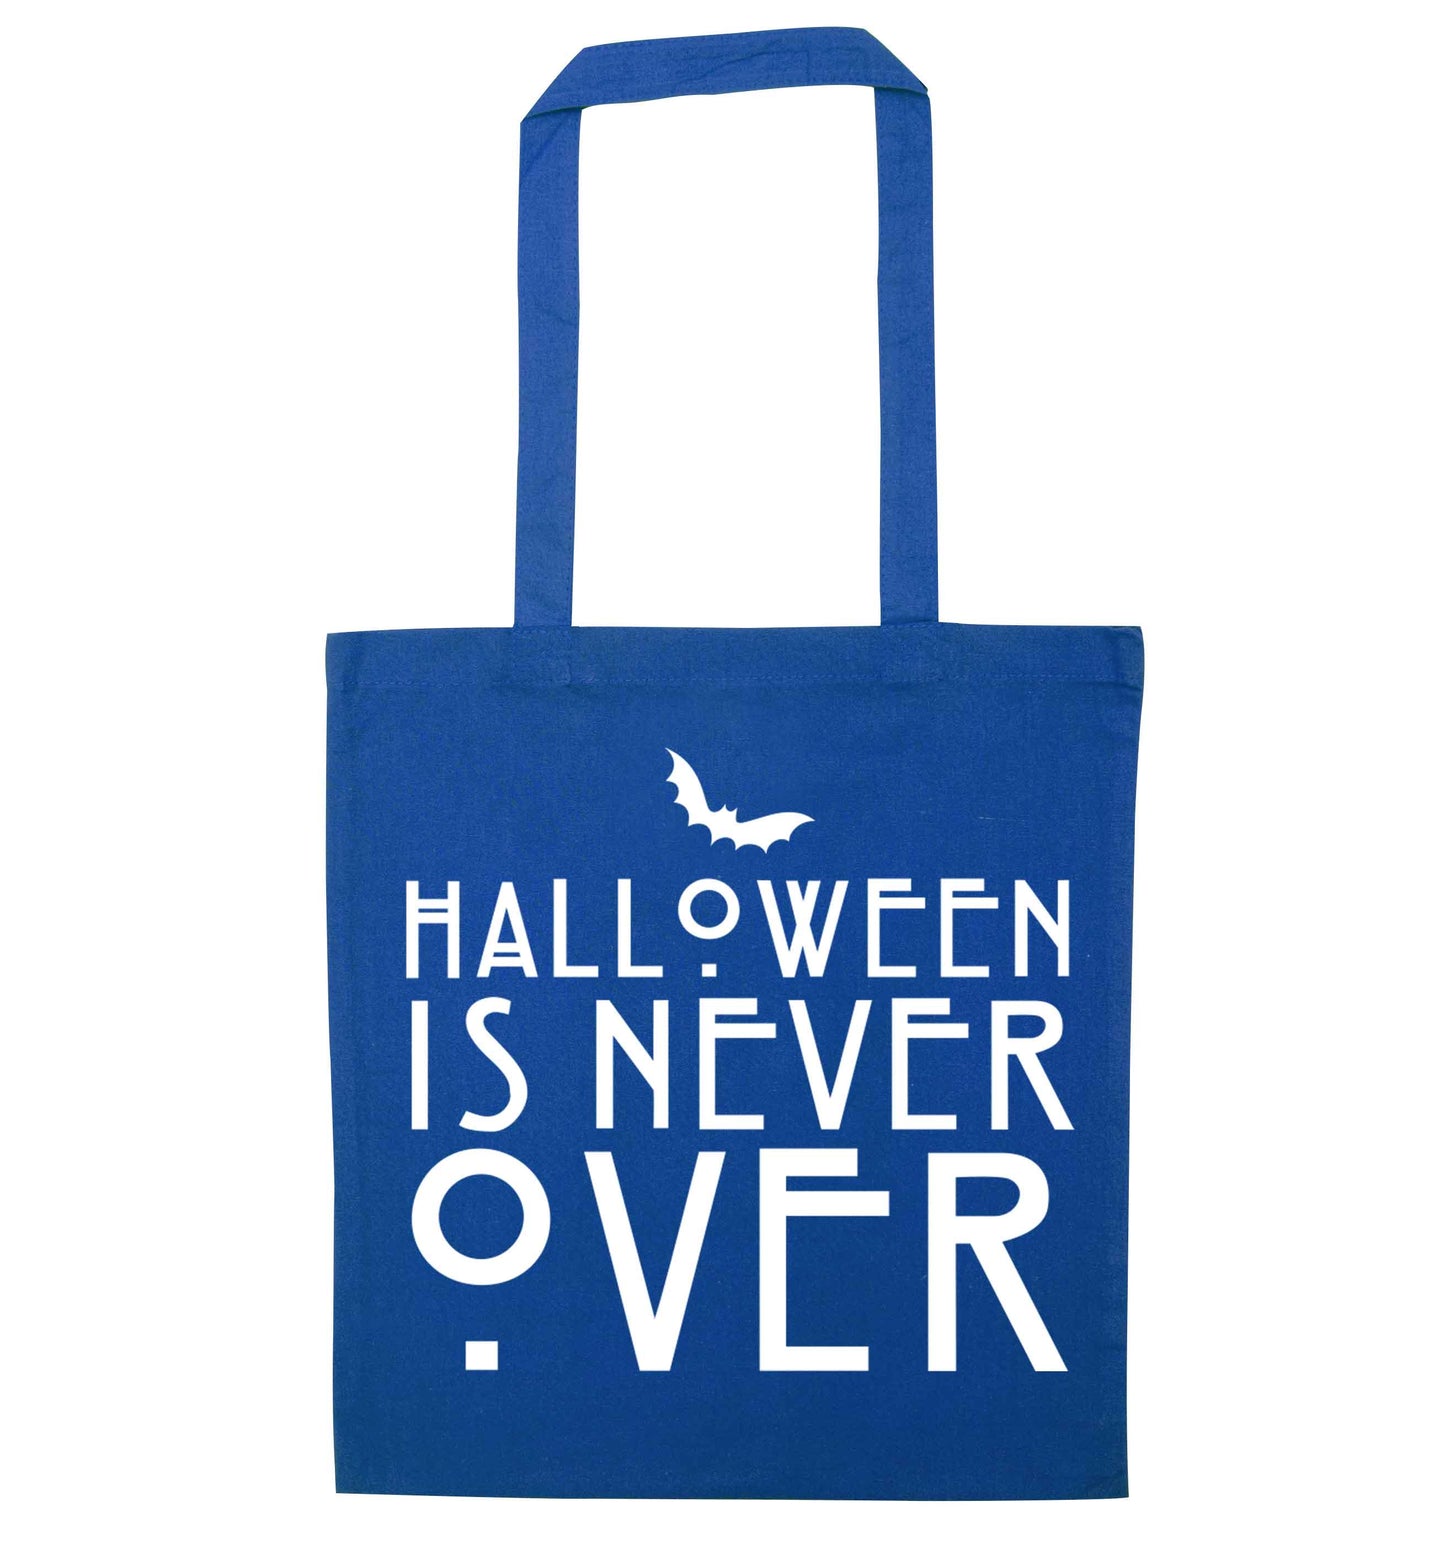 Halloween is never over blue tote bag